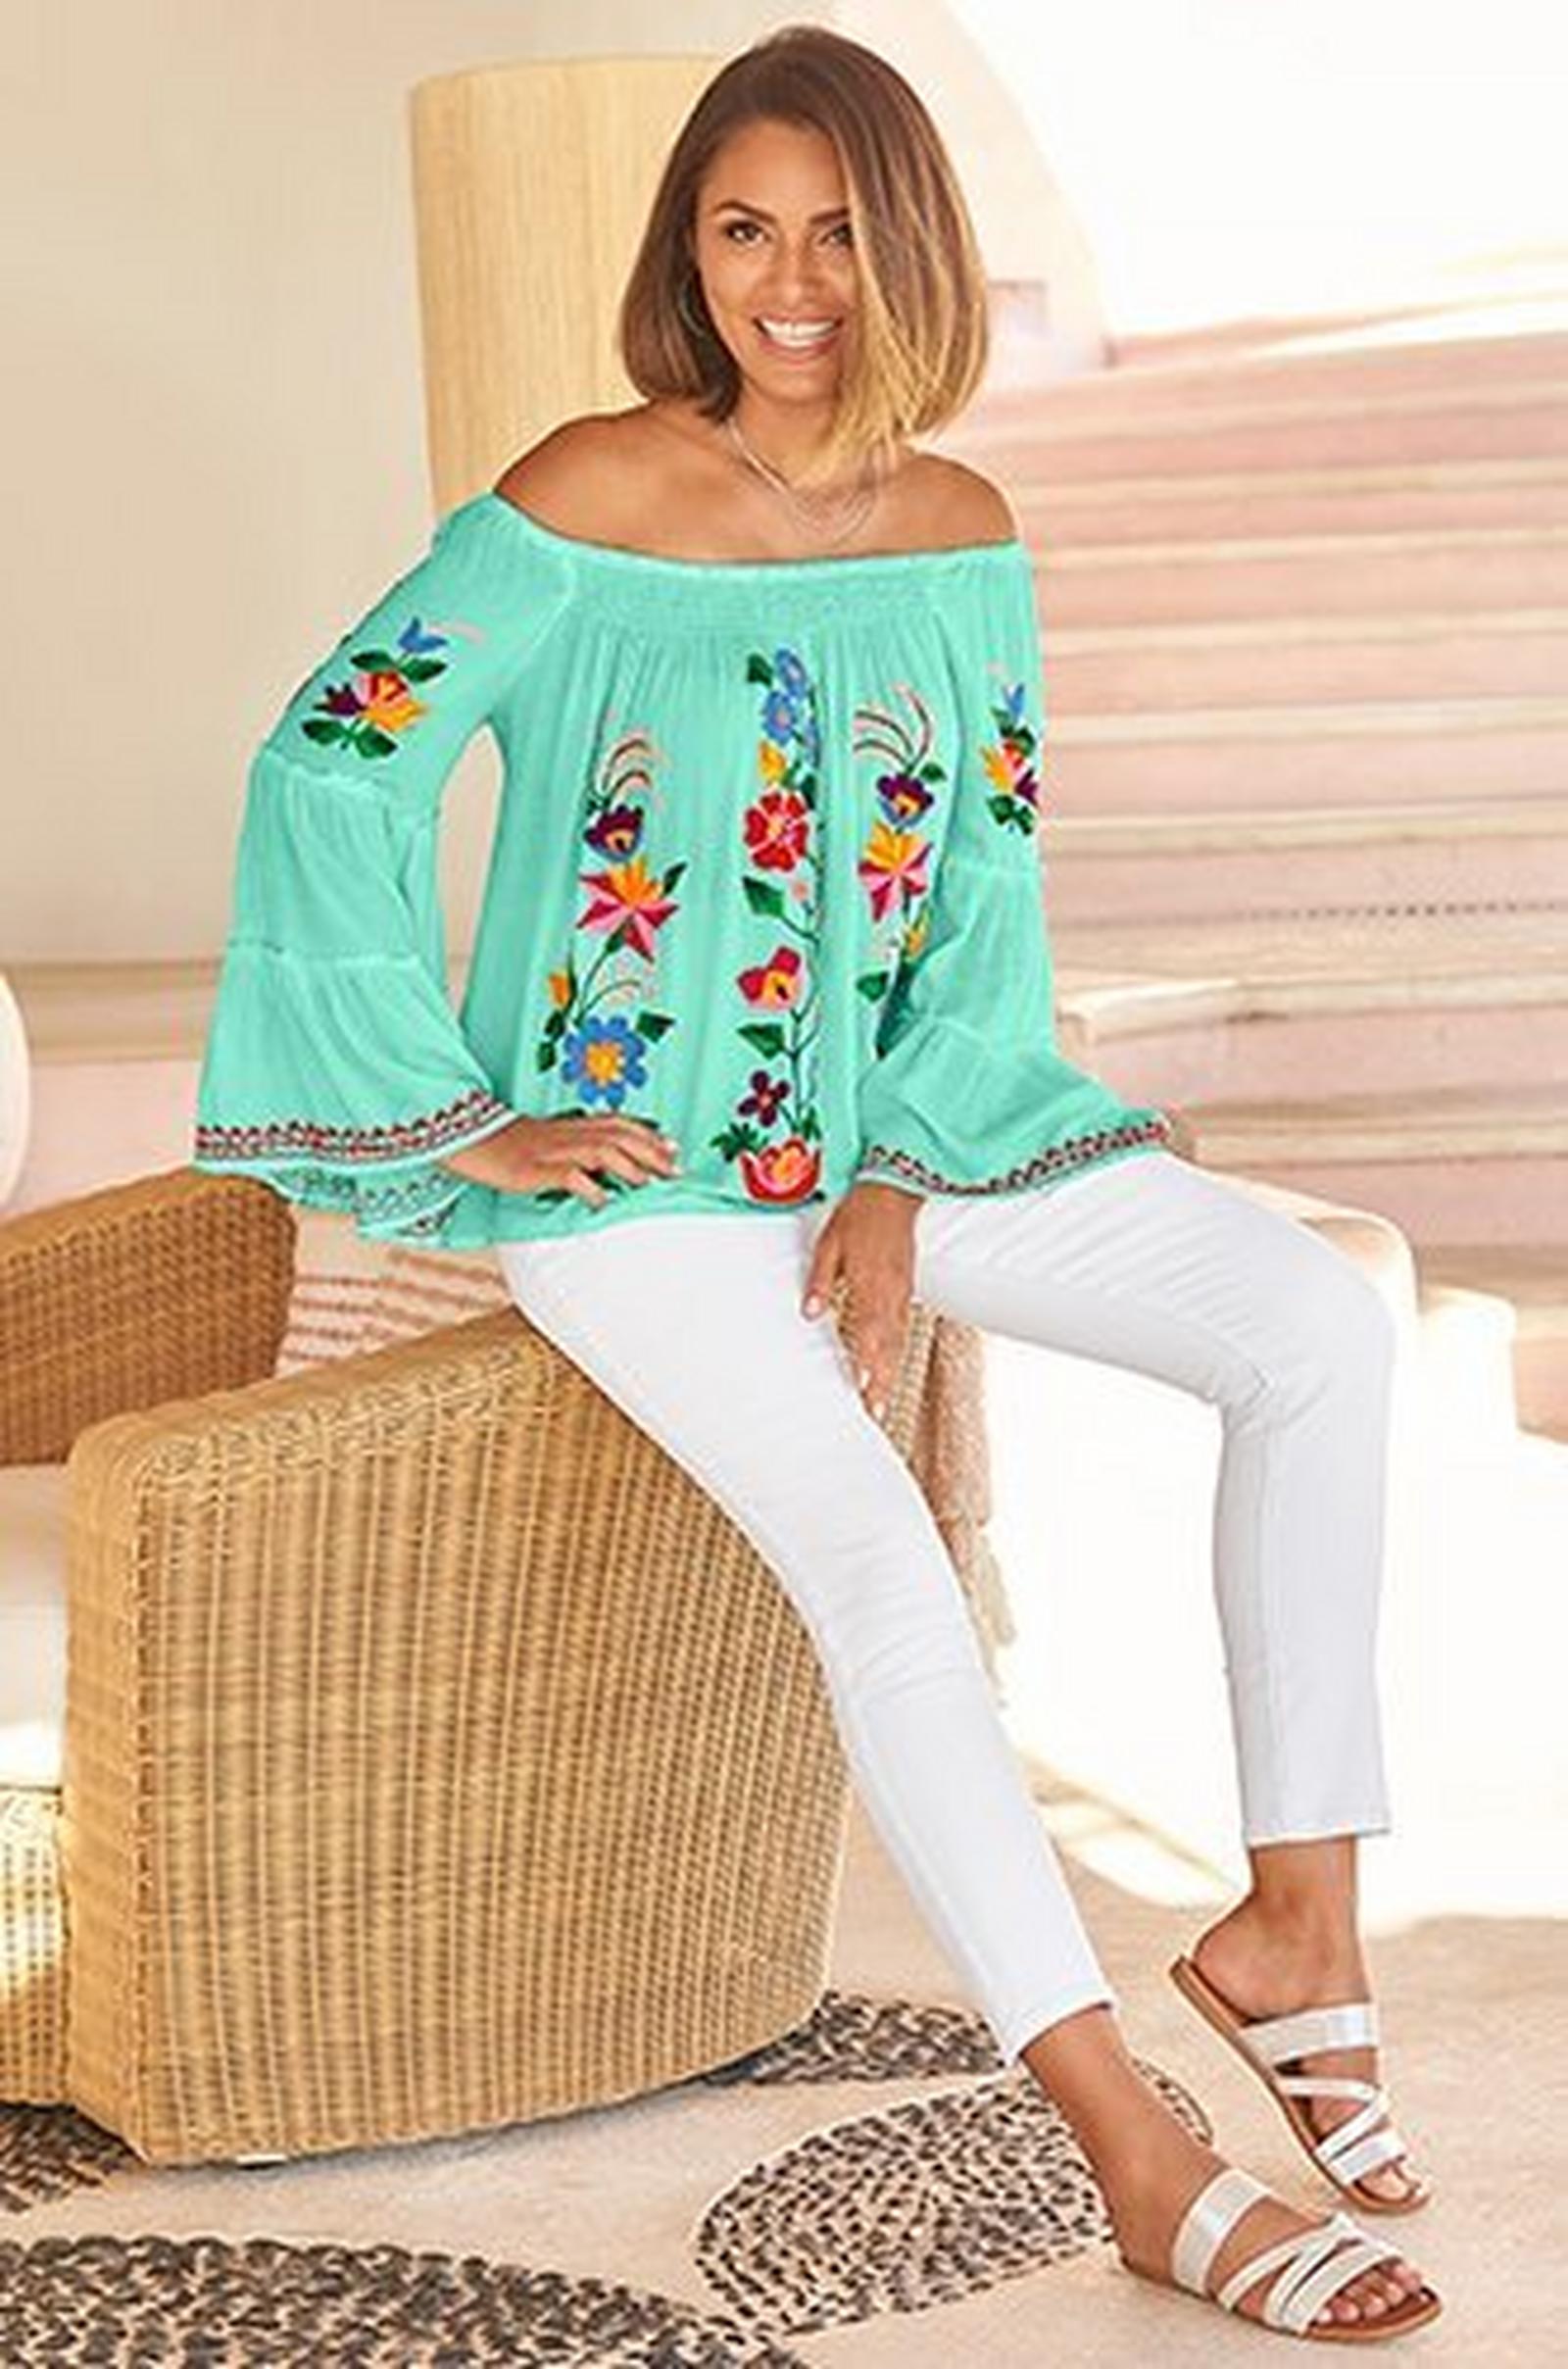 model wearing a mint off-the-shoulder floral embroidered flare-sleeve top, white jeans, and silver strappy sandals.